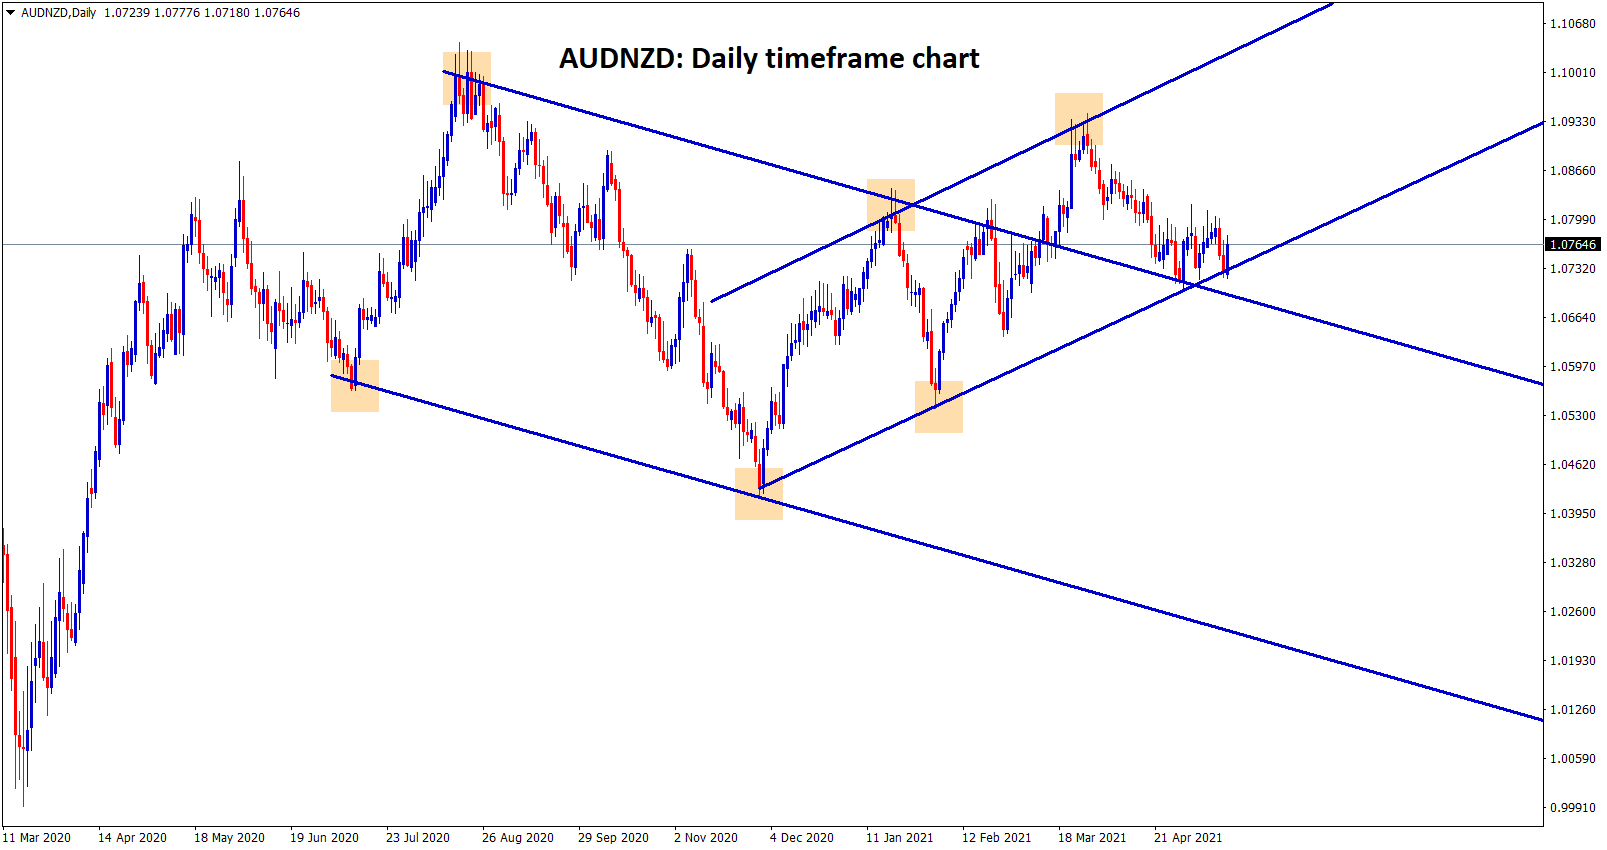 AUDNZD is moving between the channel ranges in the daily timeframe